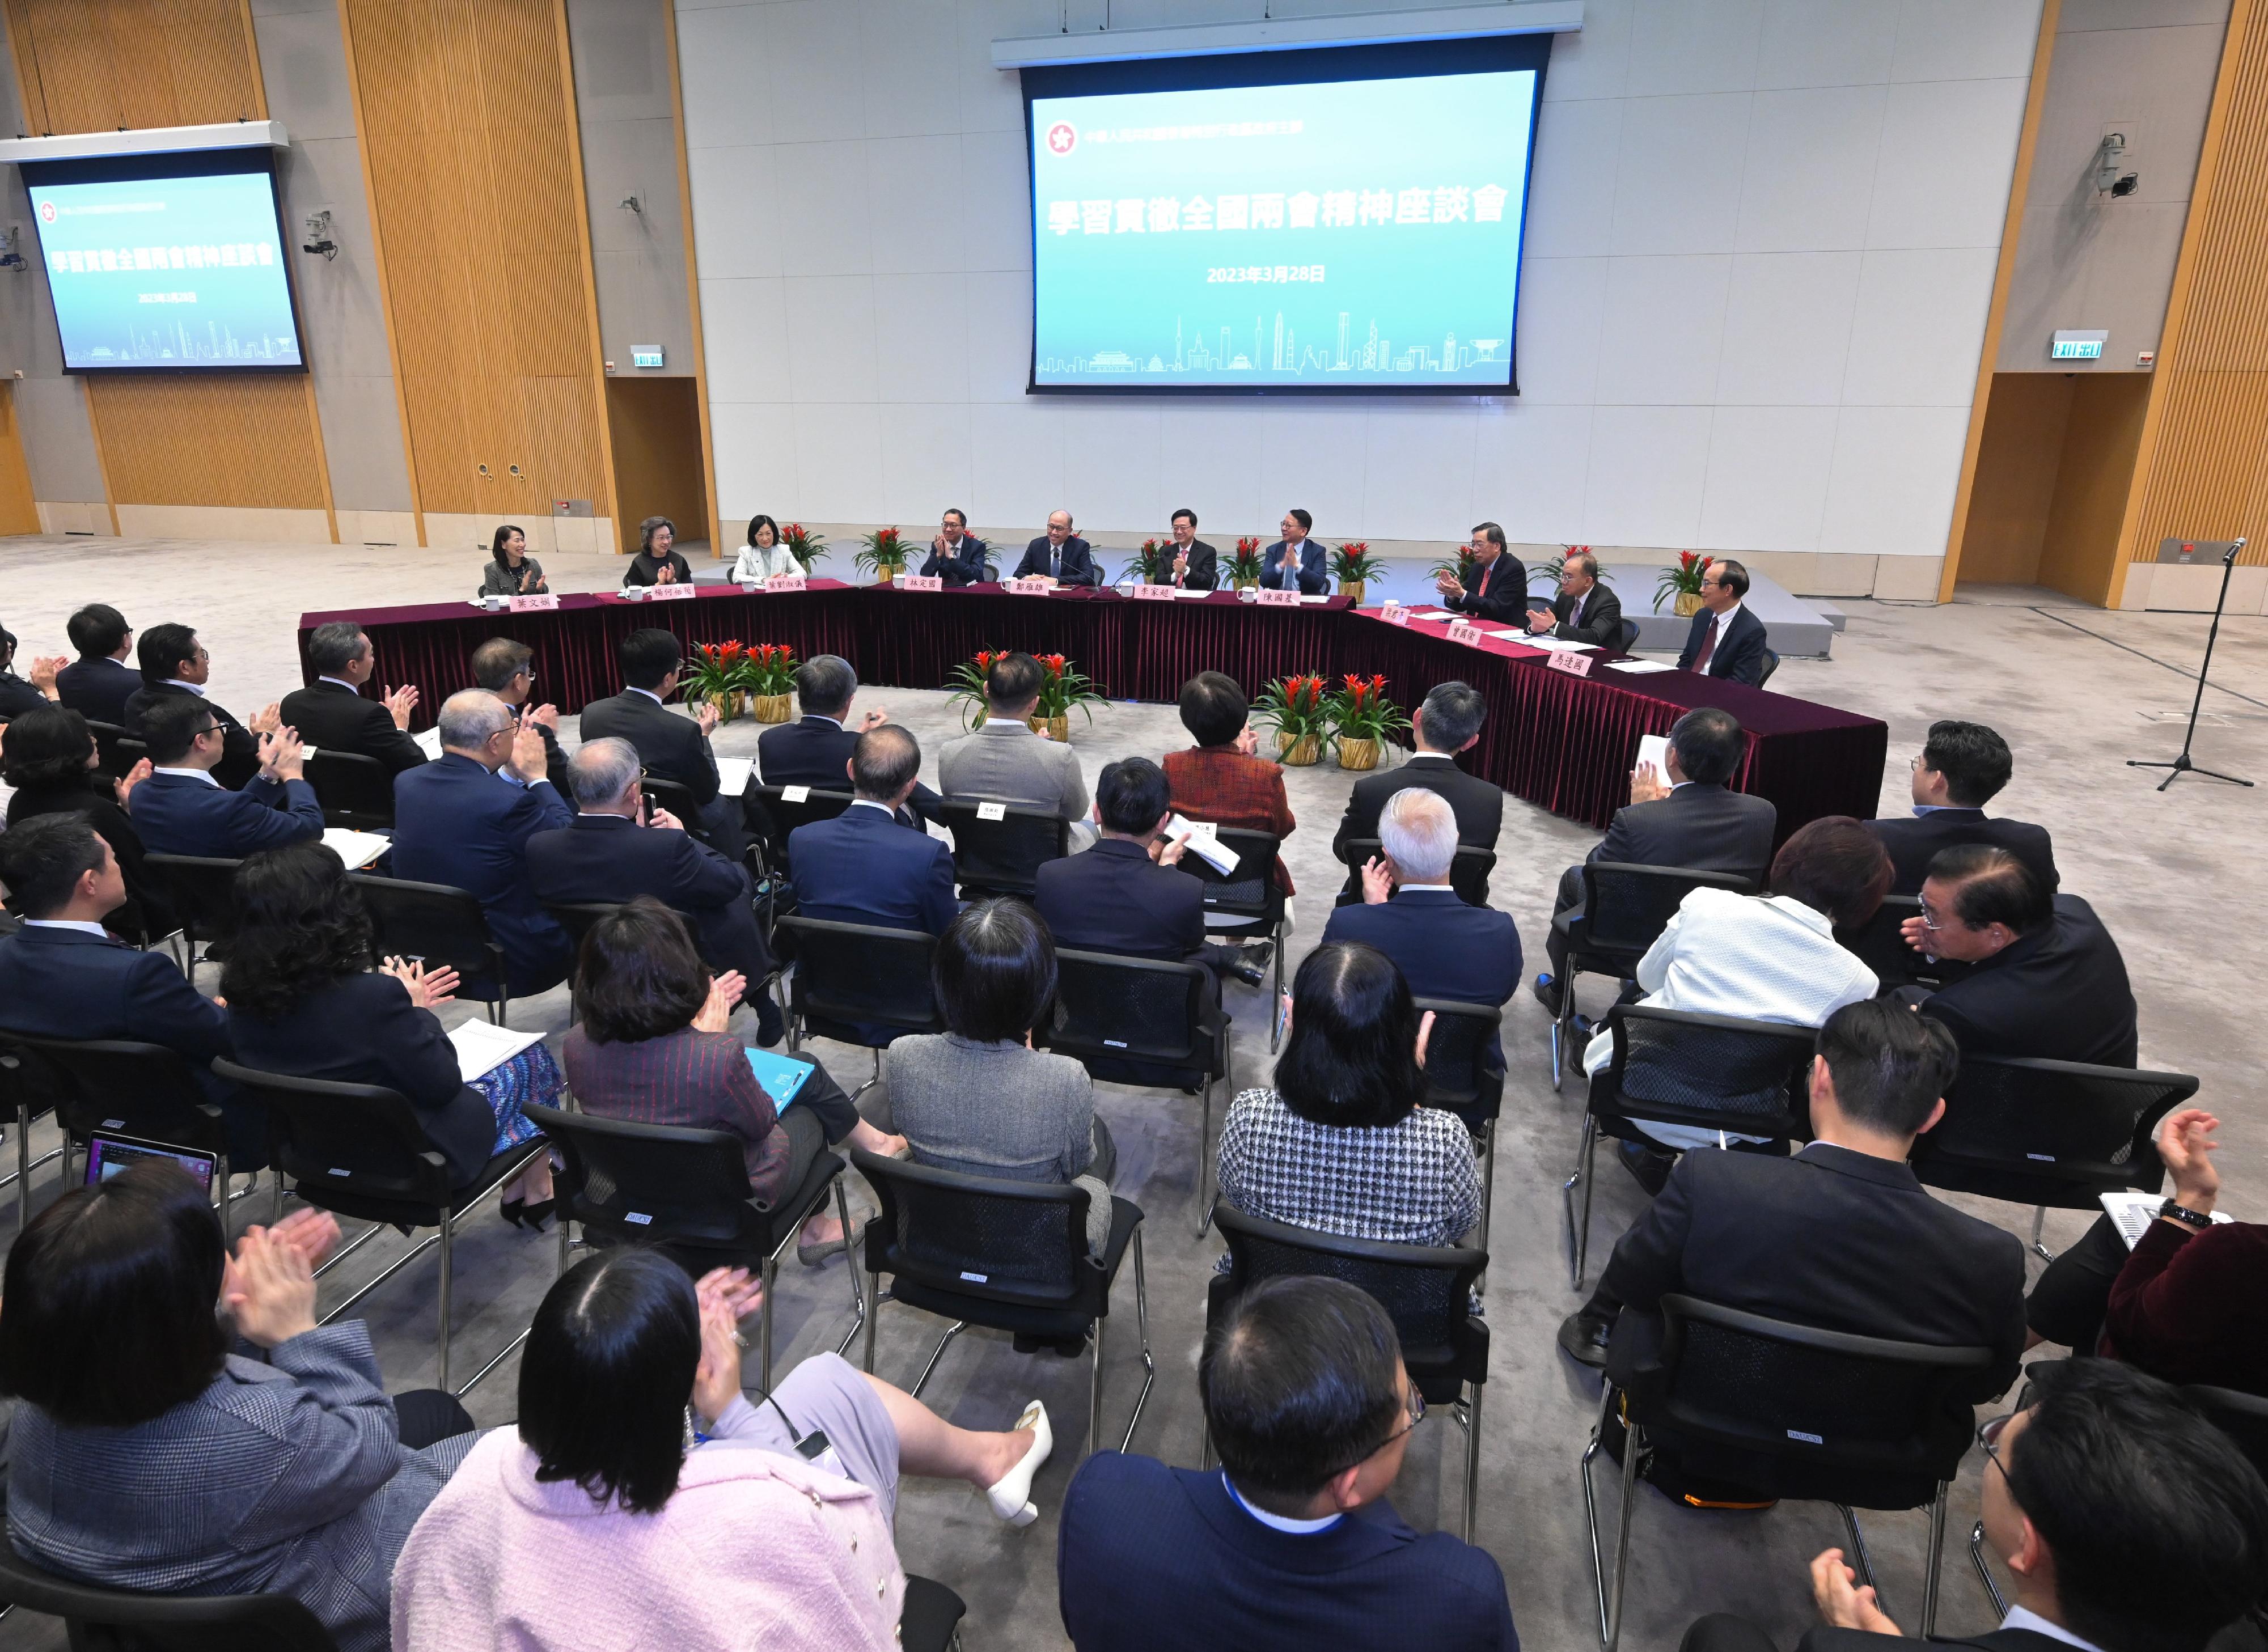 The Hong Kong Special Administrative Region Government today (March 28) held a seminar on learning and implementing the spirit of the “two sessions” at the Central Government Offices.